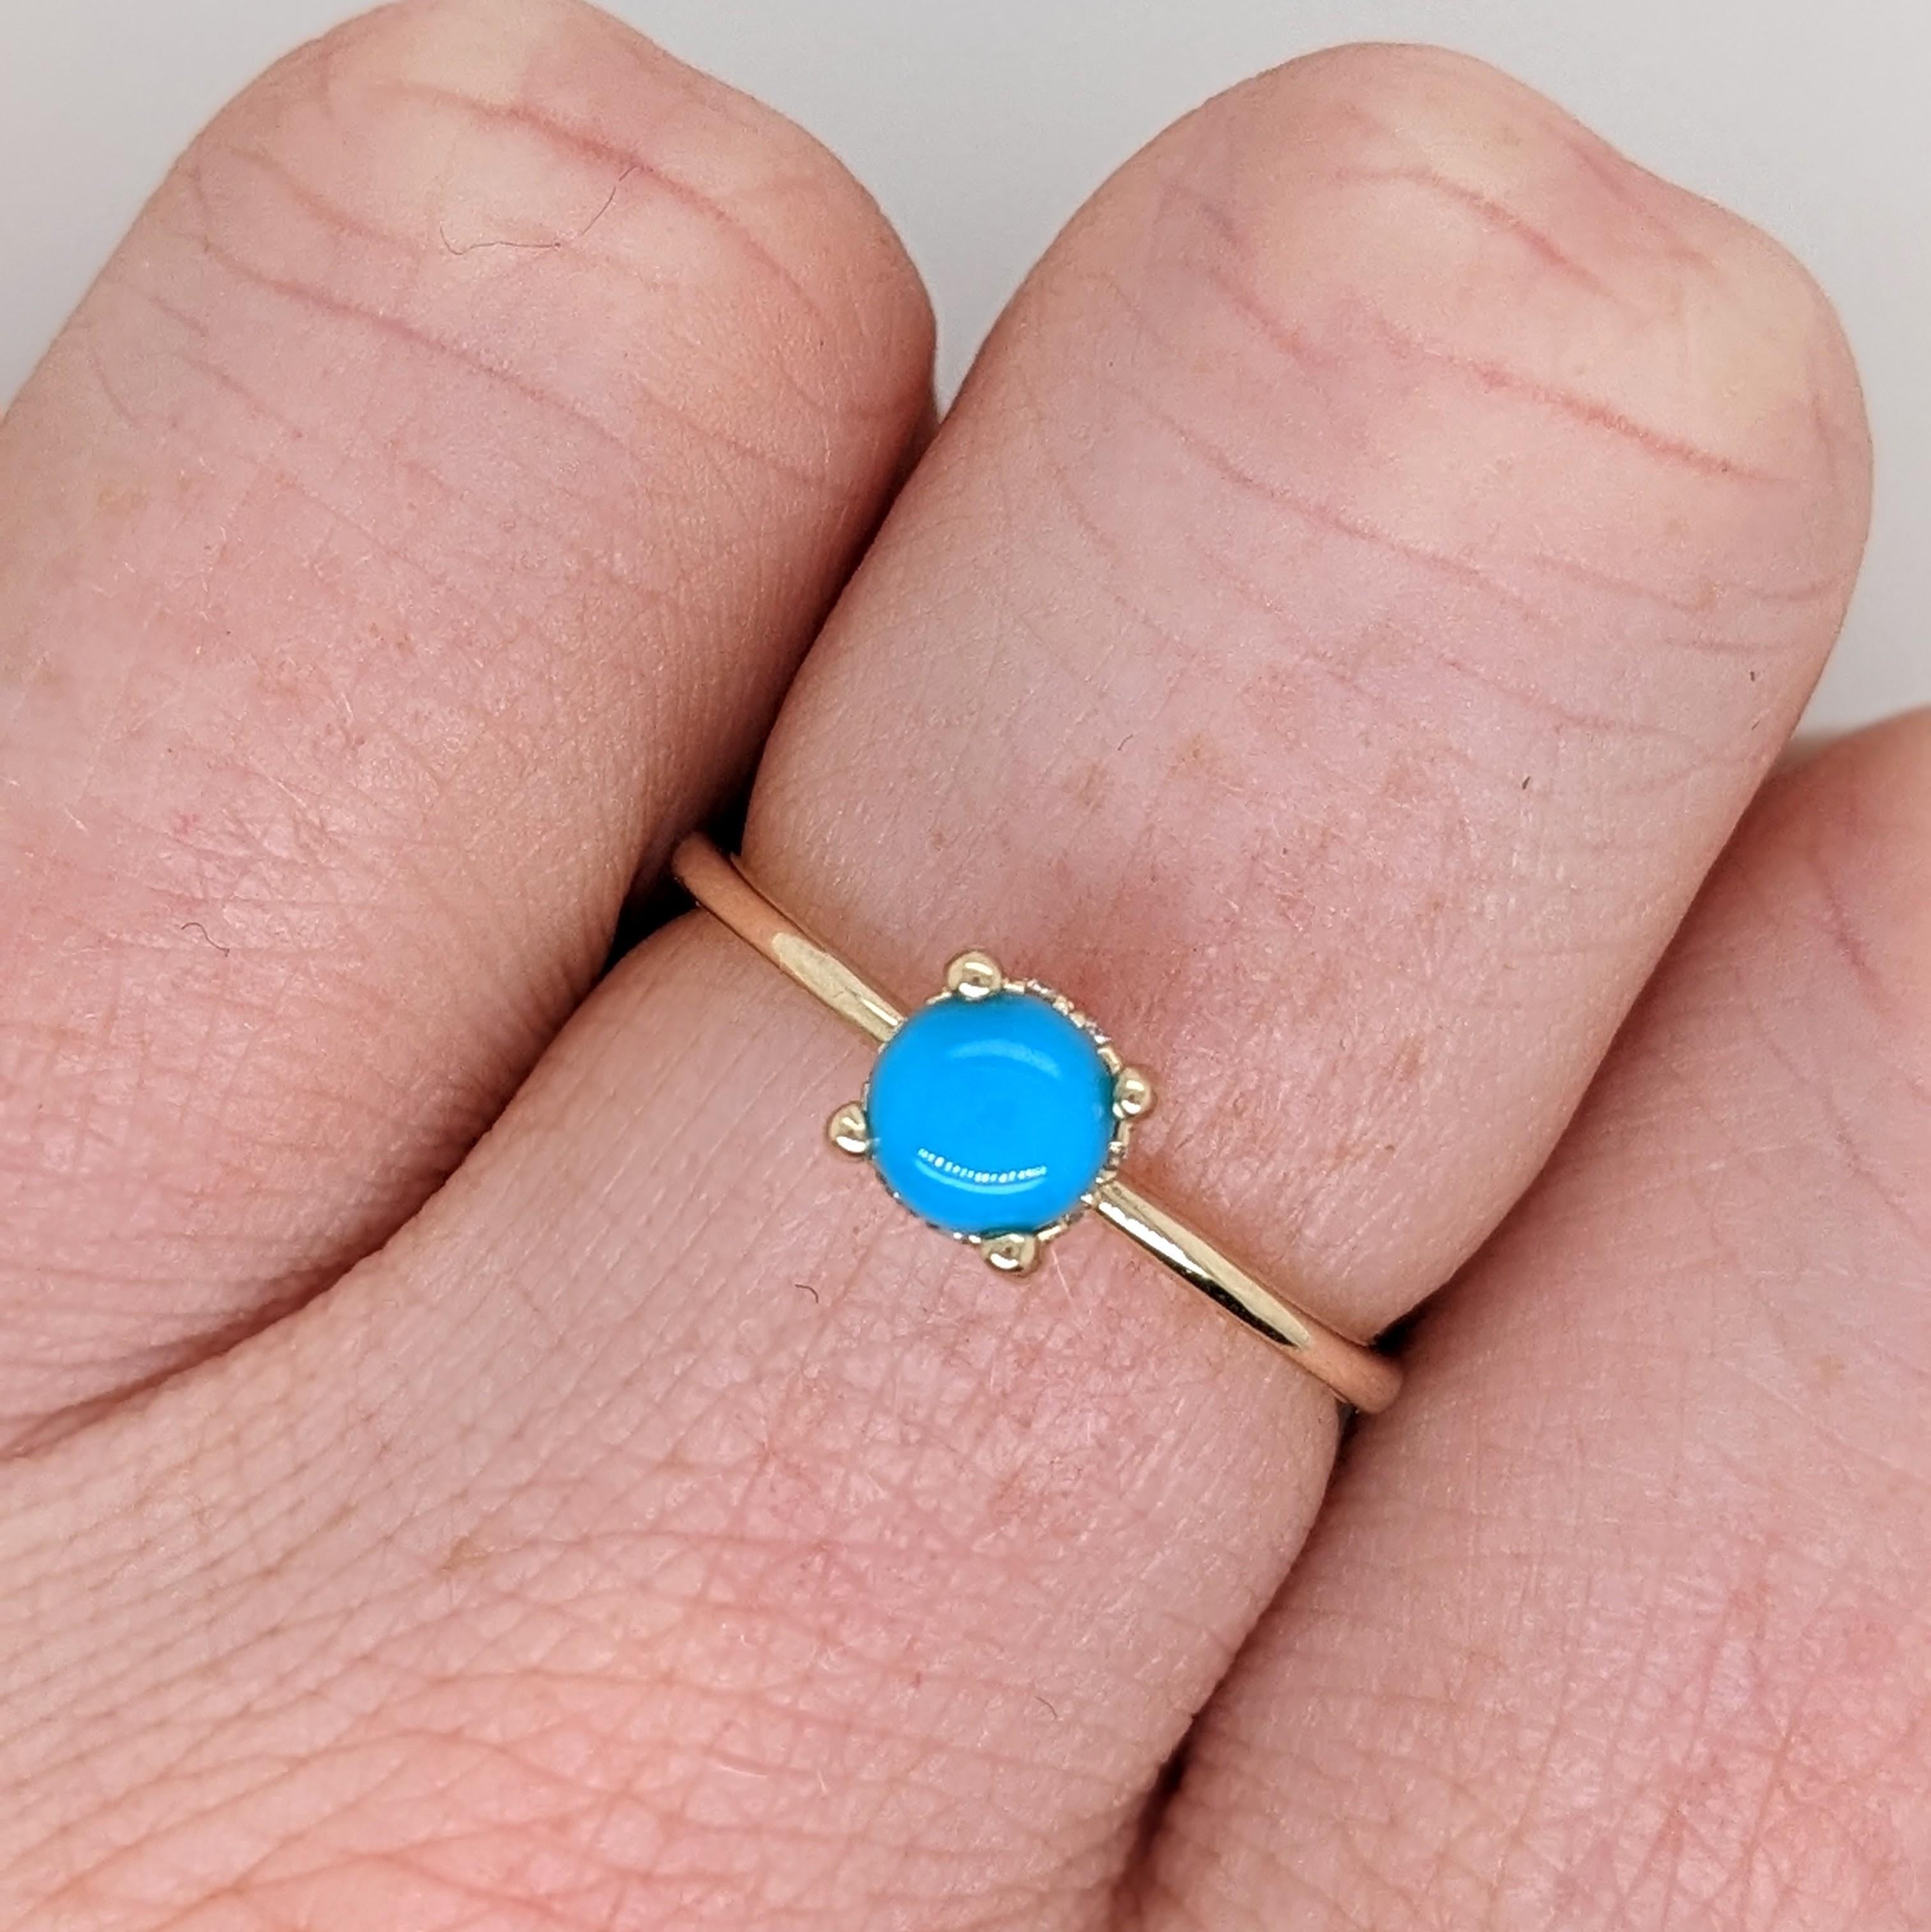 This ring features a 5mm turquoise with natural earth-mined diamonds. A simple dainty ring perfect for the minimalist in your life or for giving someone their first piece of jewelry :)

Specifications

Item Type: Ring
Centre